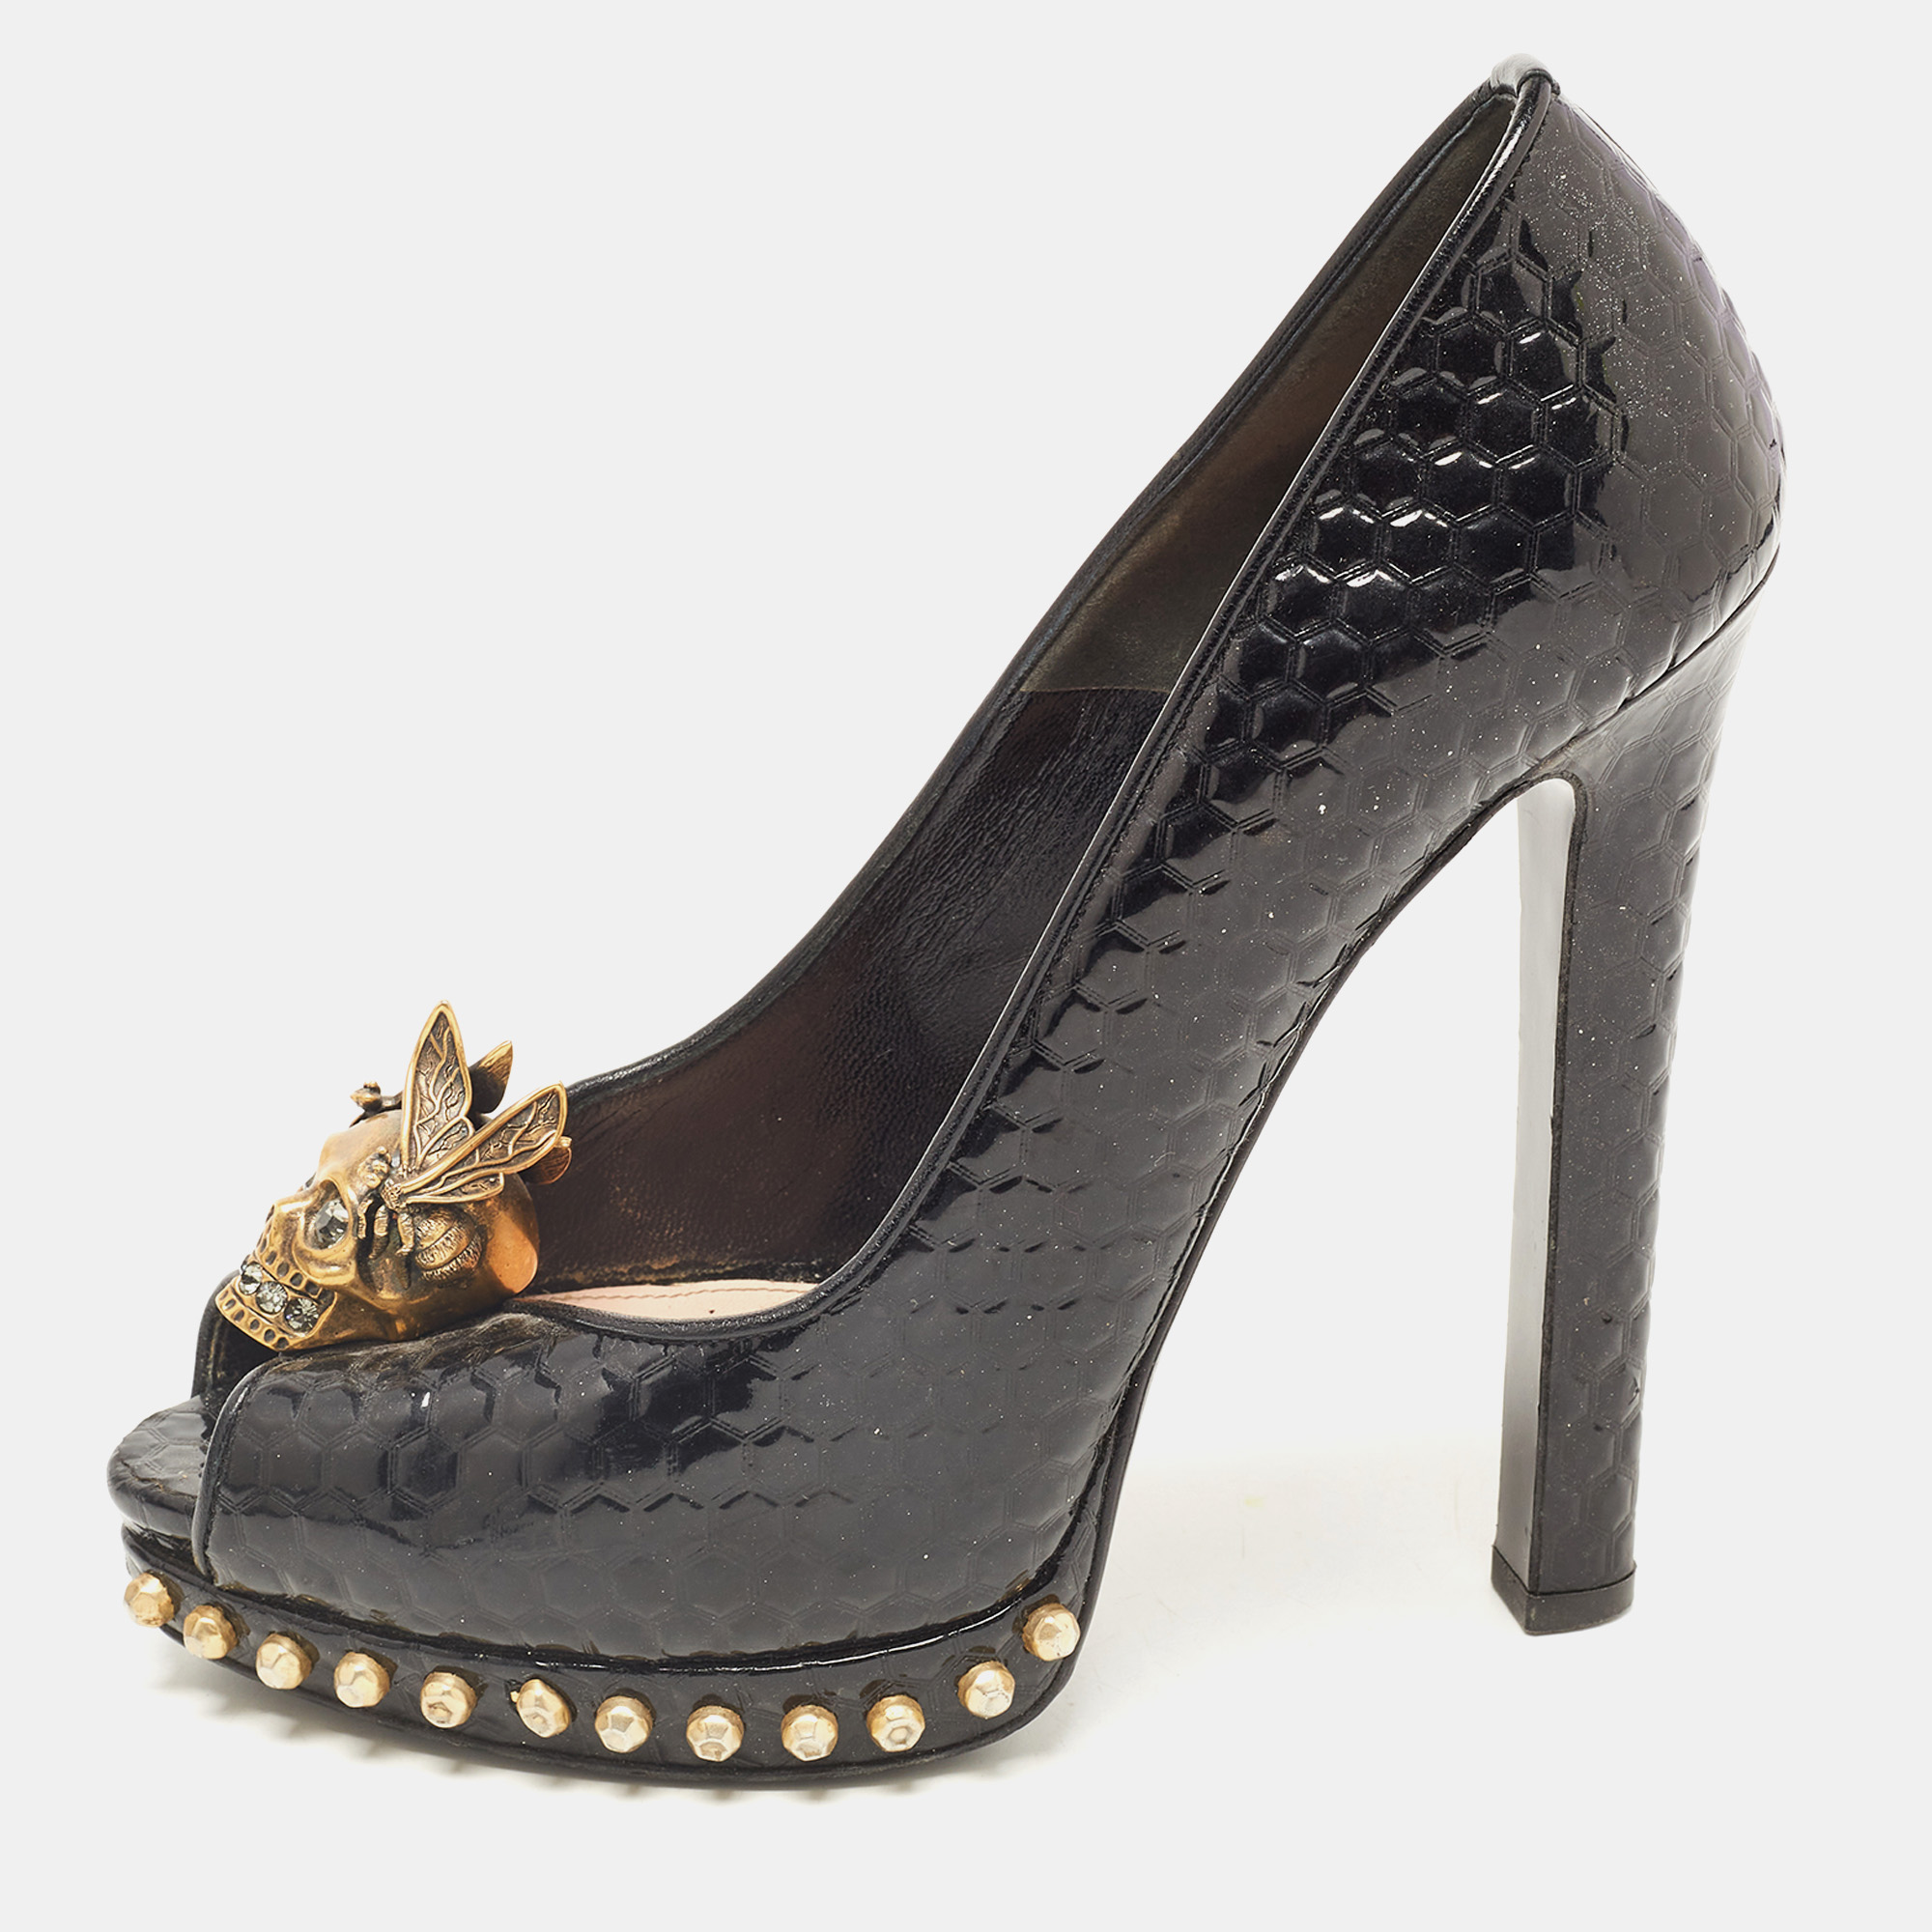 Pre-owned Alexander Mcqueen Black Patent Leather Skull Embellished Peep Toe Pumps Size 37